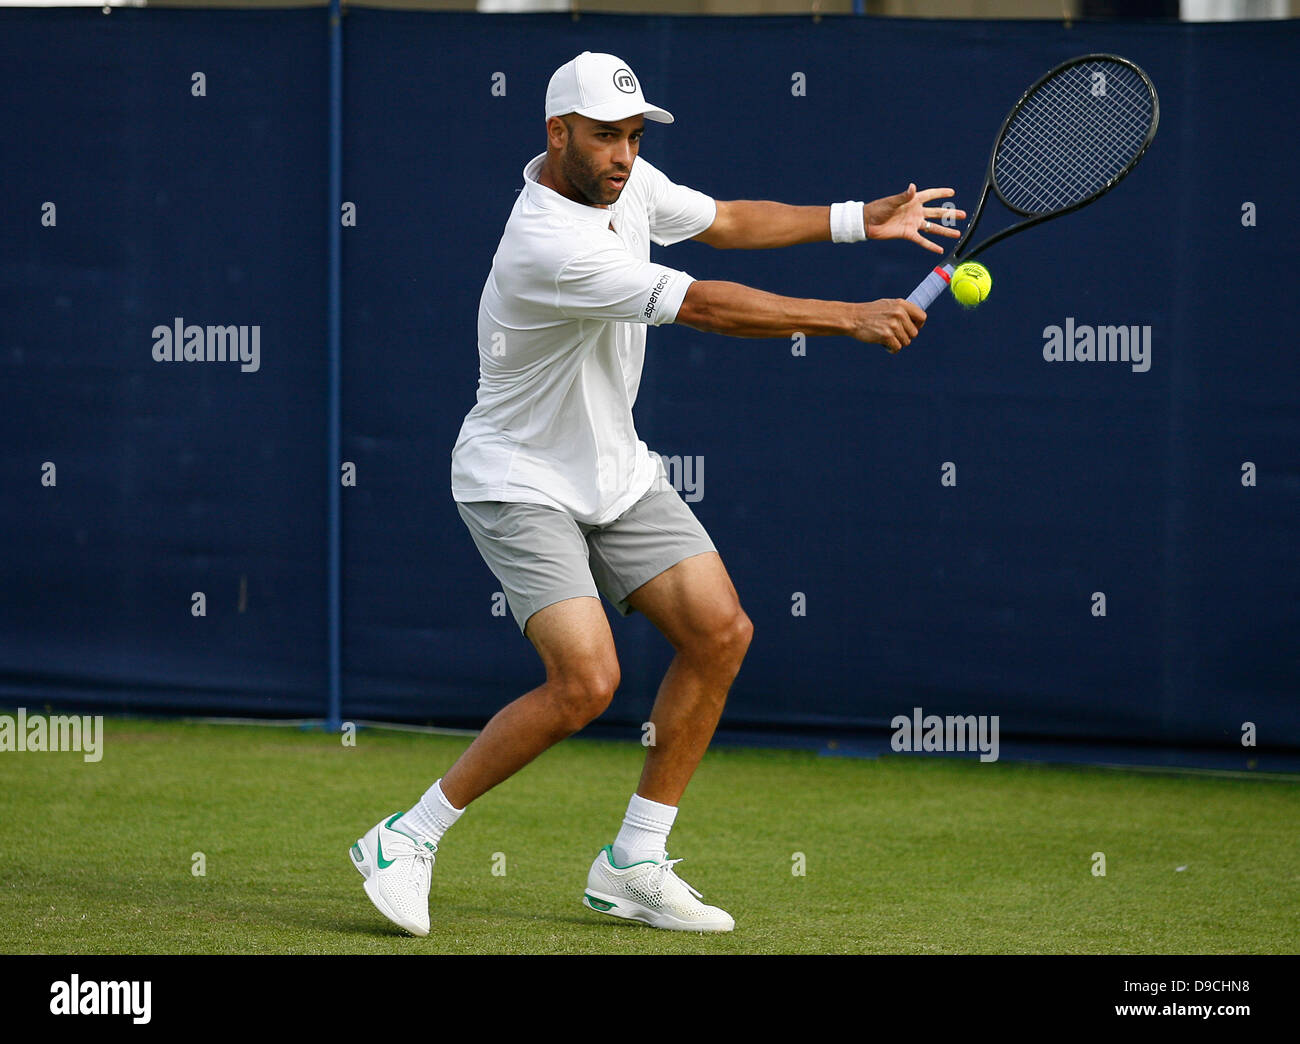 Eastbourne, UK. 17th June, 2013. James Blake (USA) in action during the AEGON International tournament at Devonshire Park Stock Photo